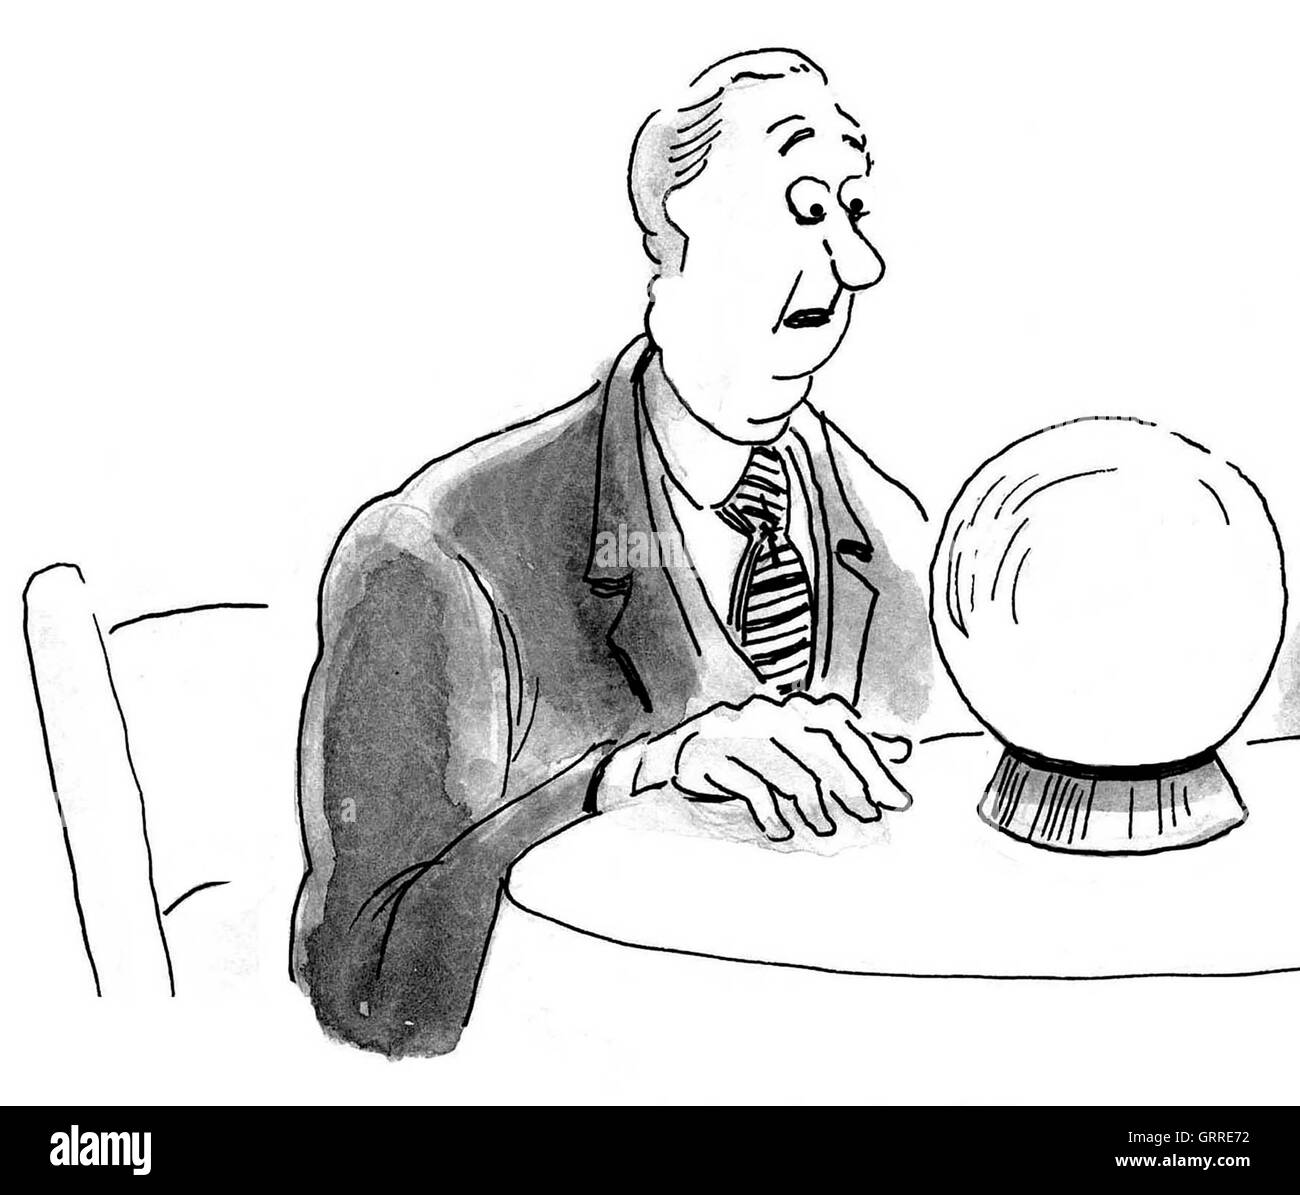 B&W business illustration showing businessman looking into crystal ball. Stock Photo